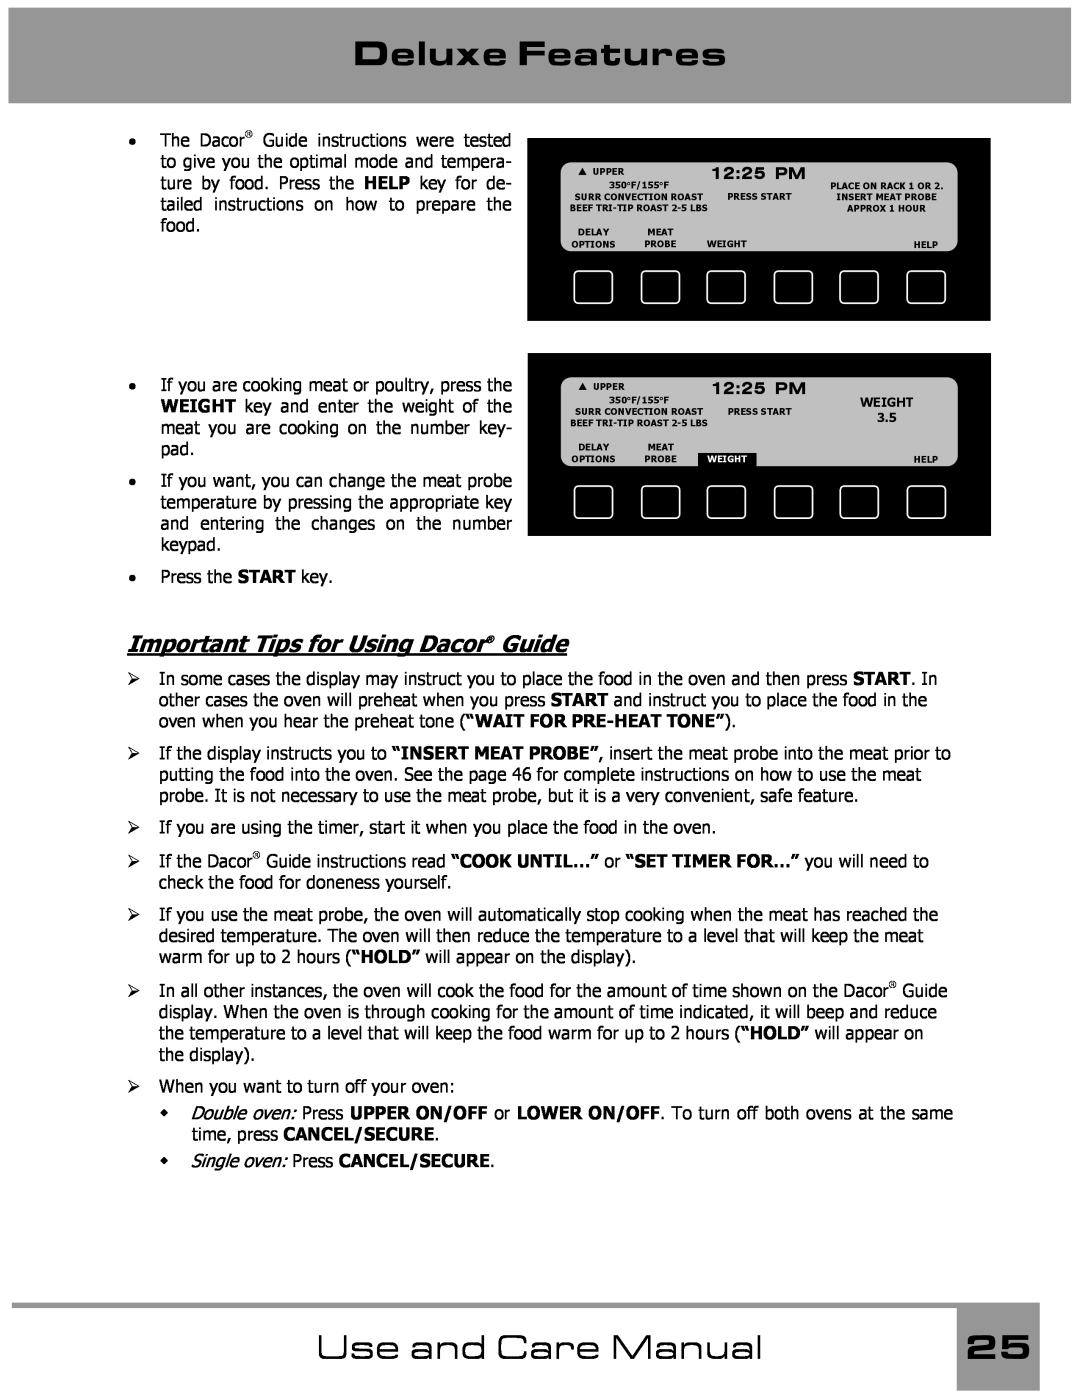 Dacor Wall Oven manual Important Tips for Using Dacor Guide, Deluxe Features, Use and Care Manual, 1225 PM 